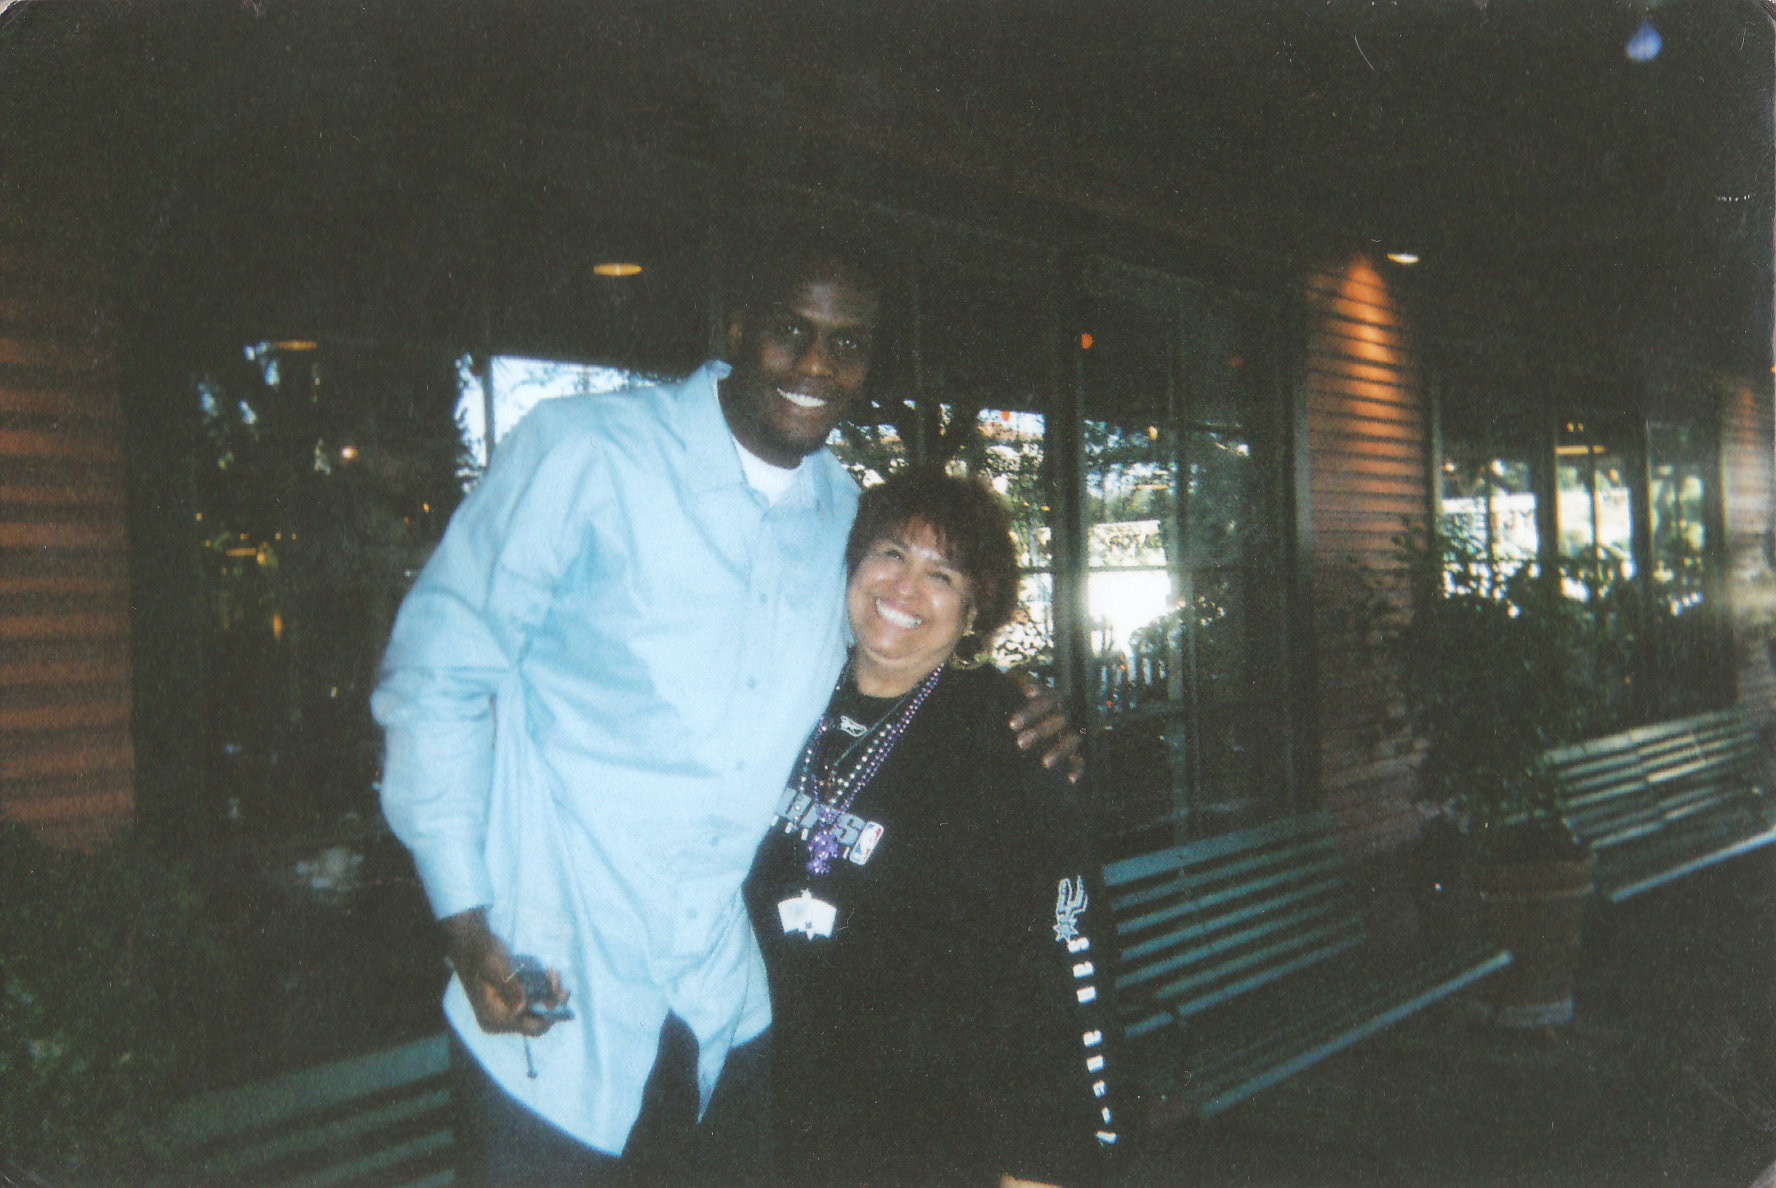 Rosa and Former San Antonio Spur Malik Rose April 14, 2004. They are standing outside of a restauraunt called Pappadeaux